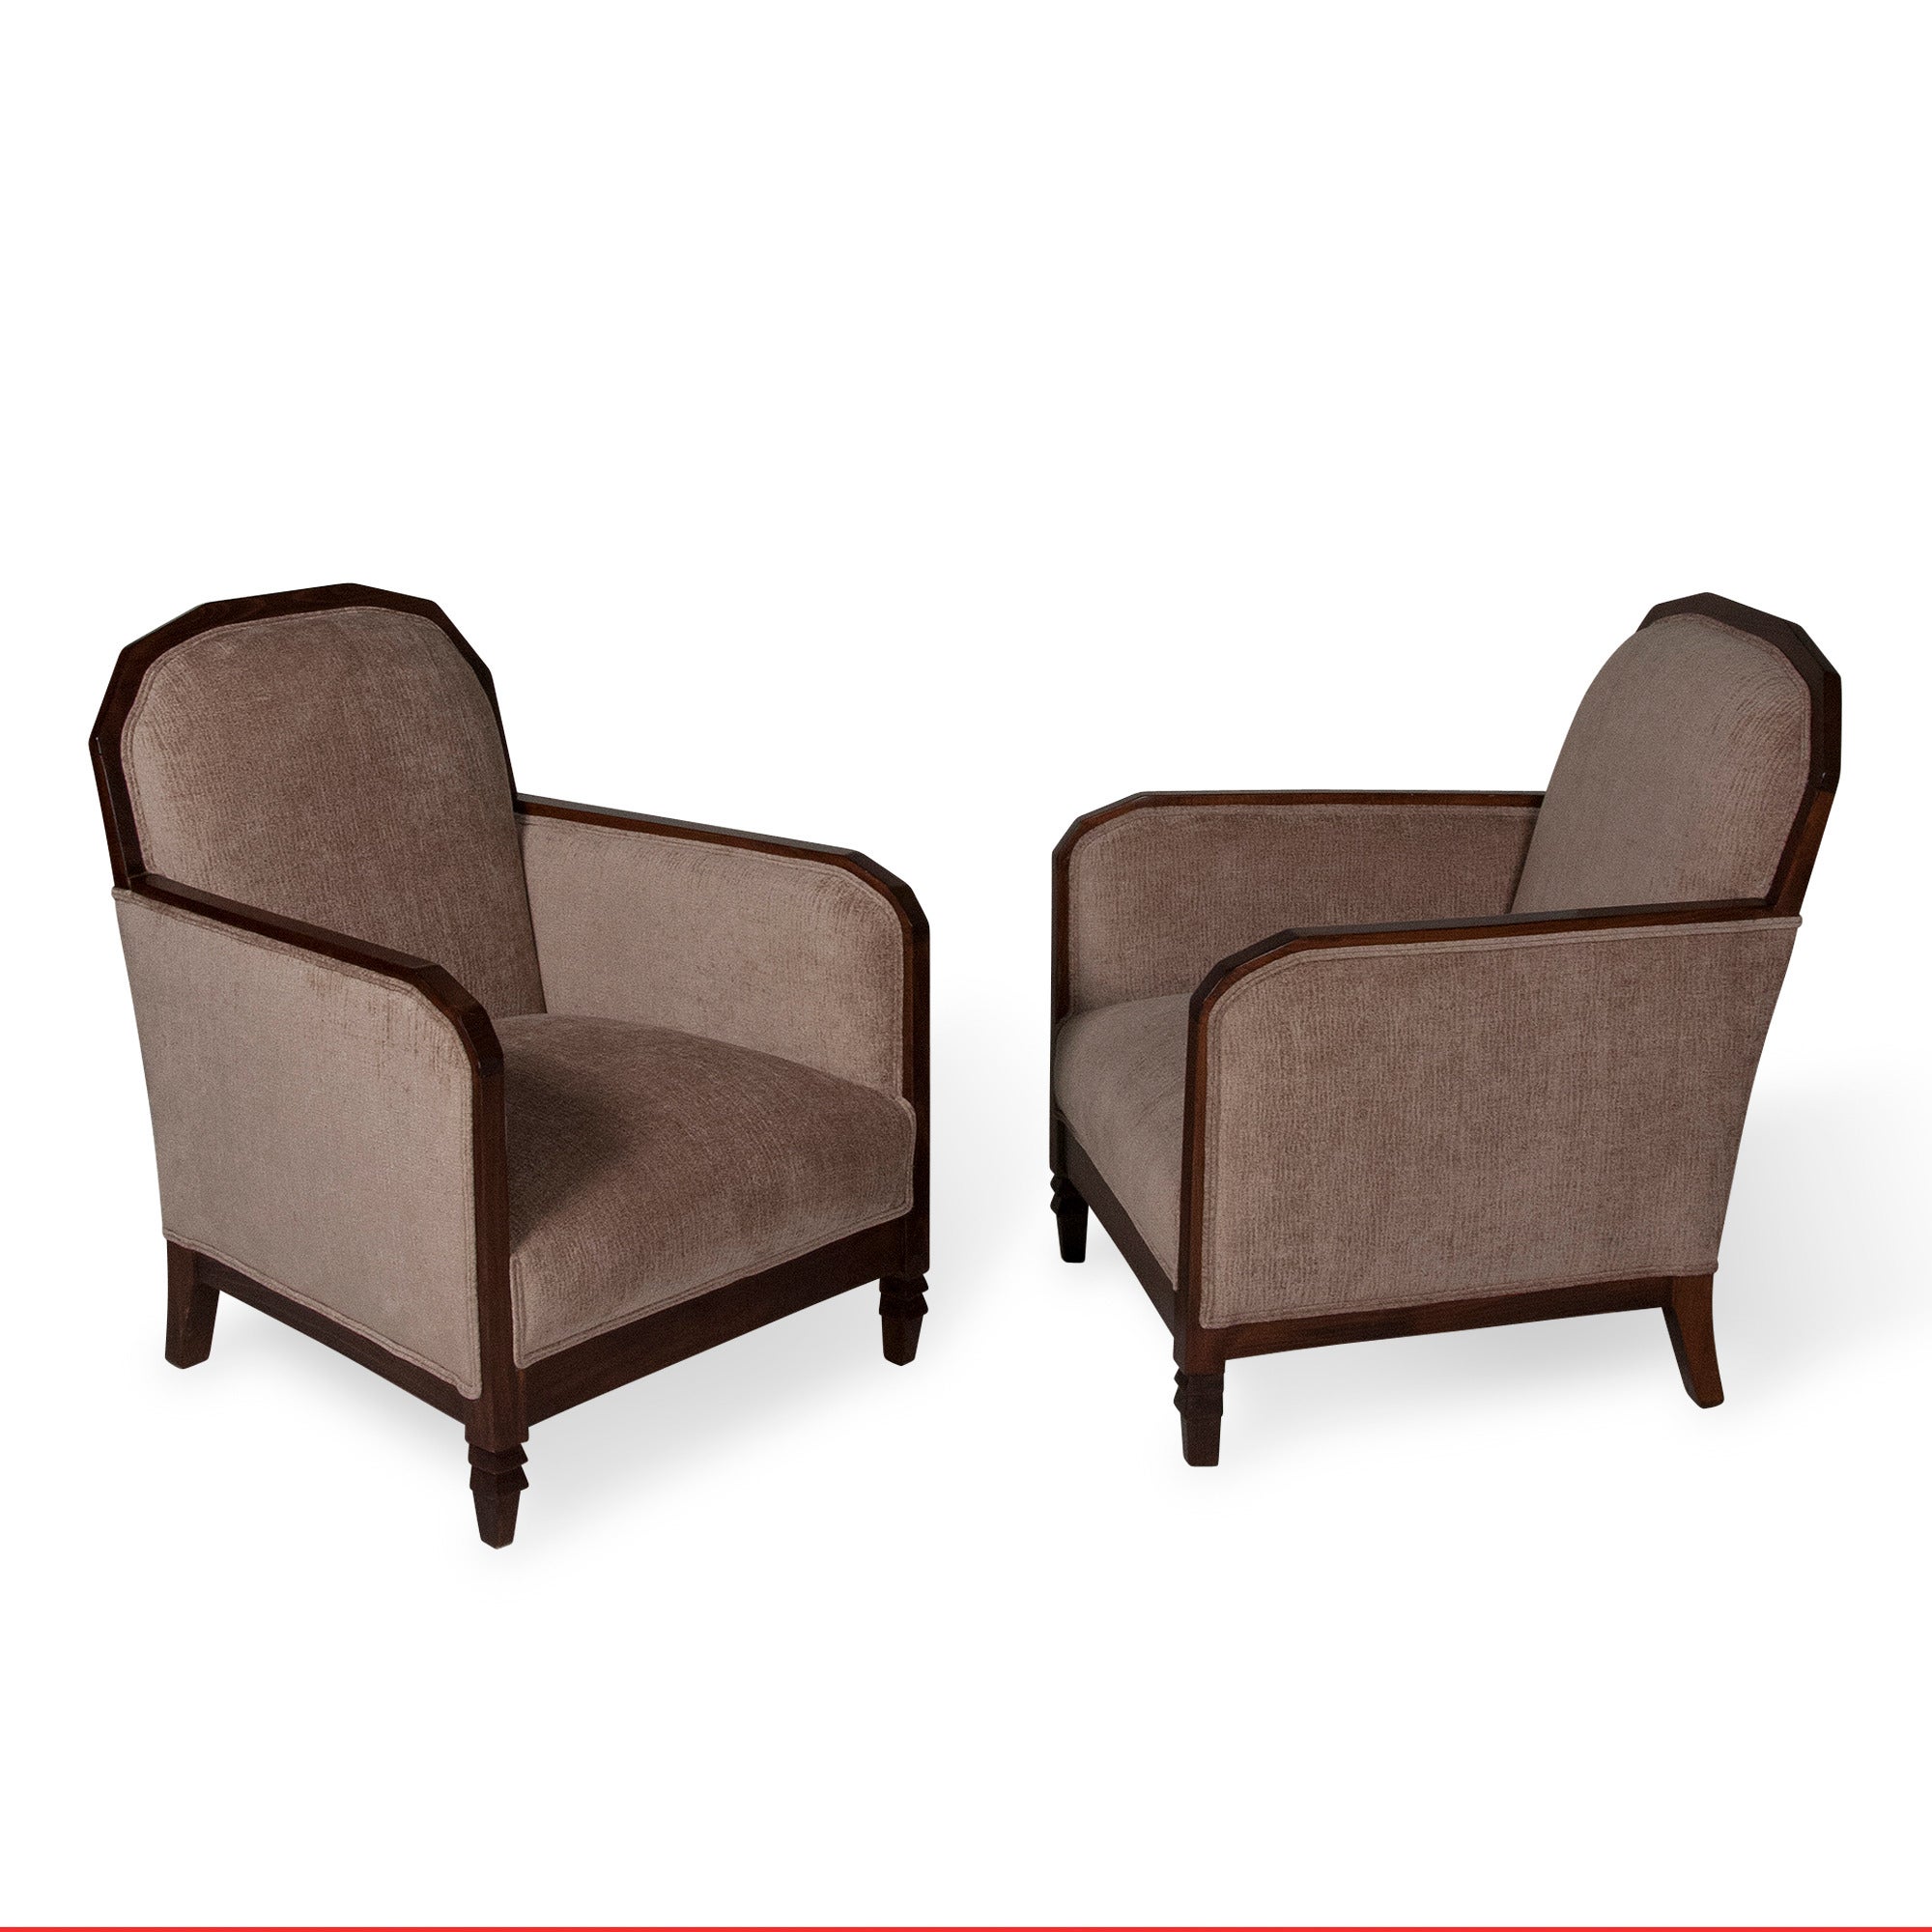 Pair of Walnut Angled Frame Armchairs